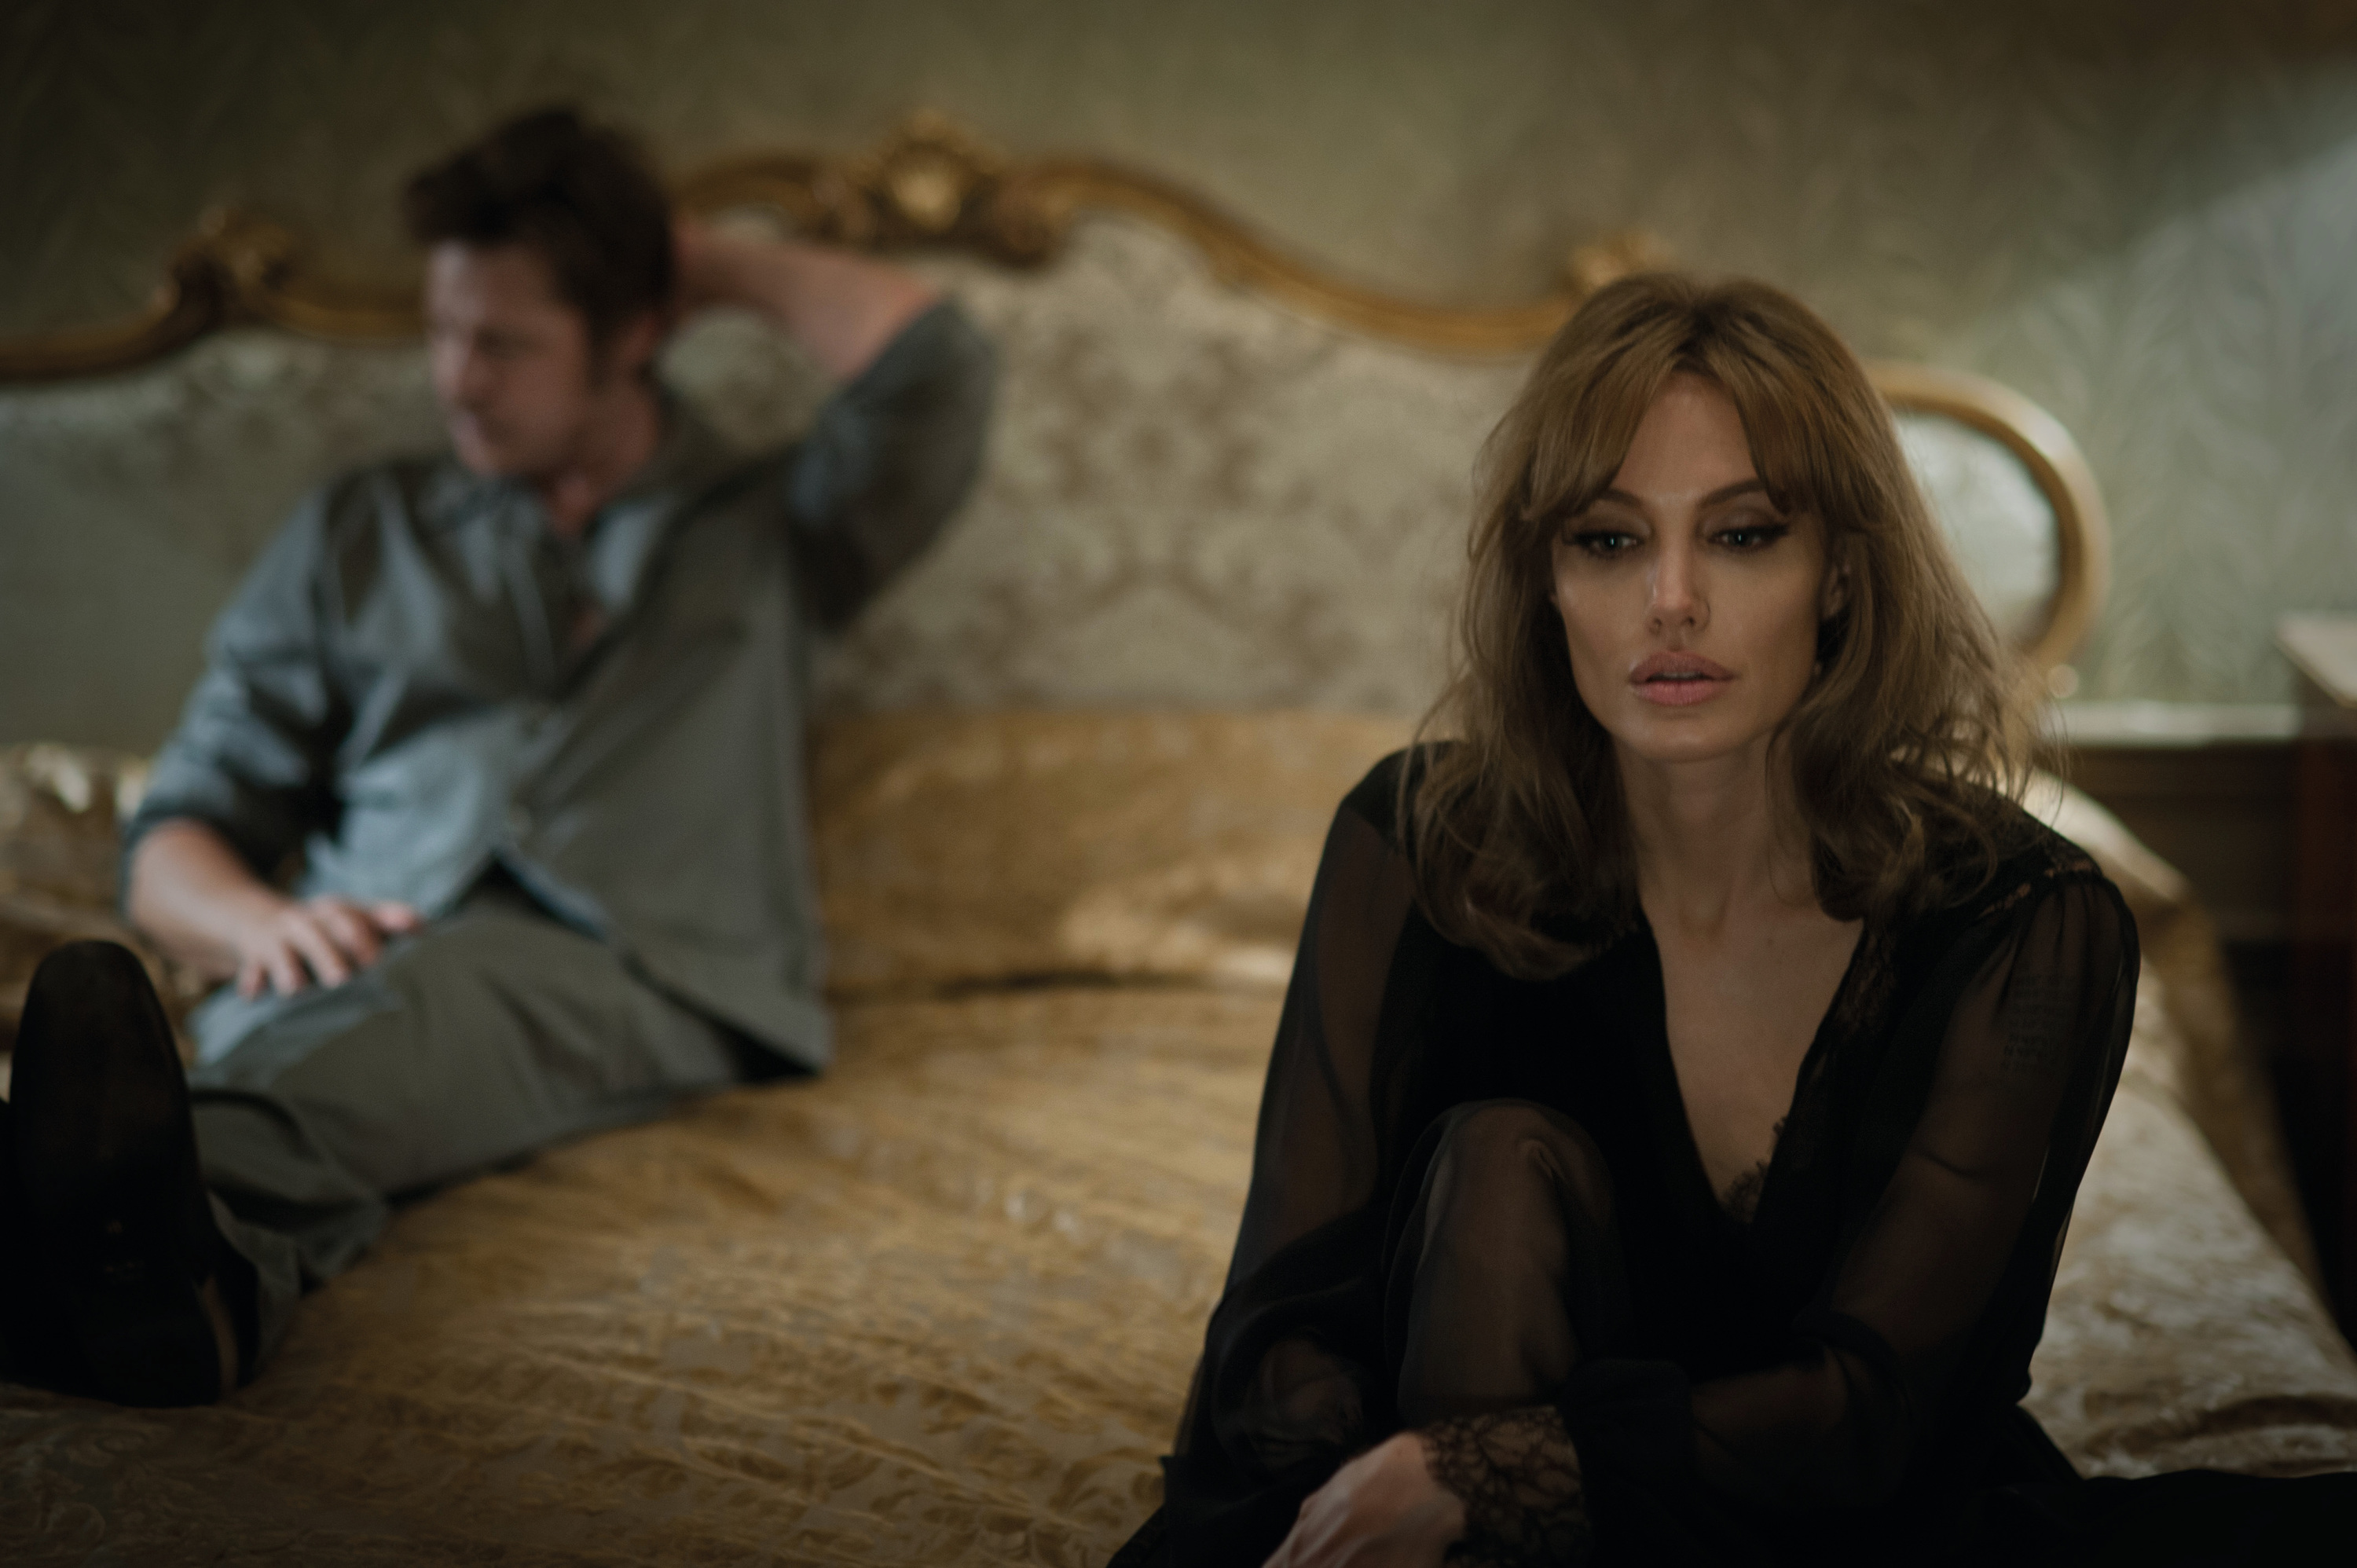 Porn Sex Angelina Jolie - By the Sea 2015, directed by Angelina Jolie | Film review